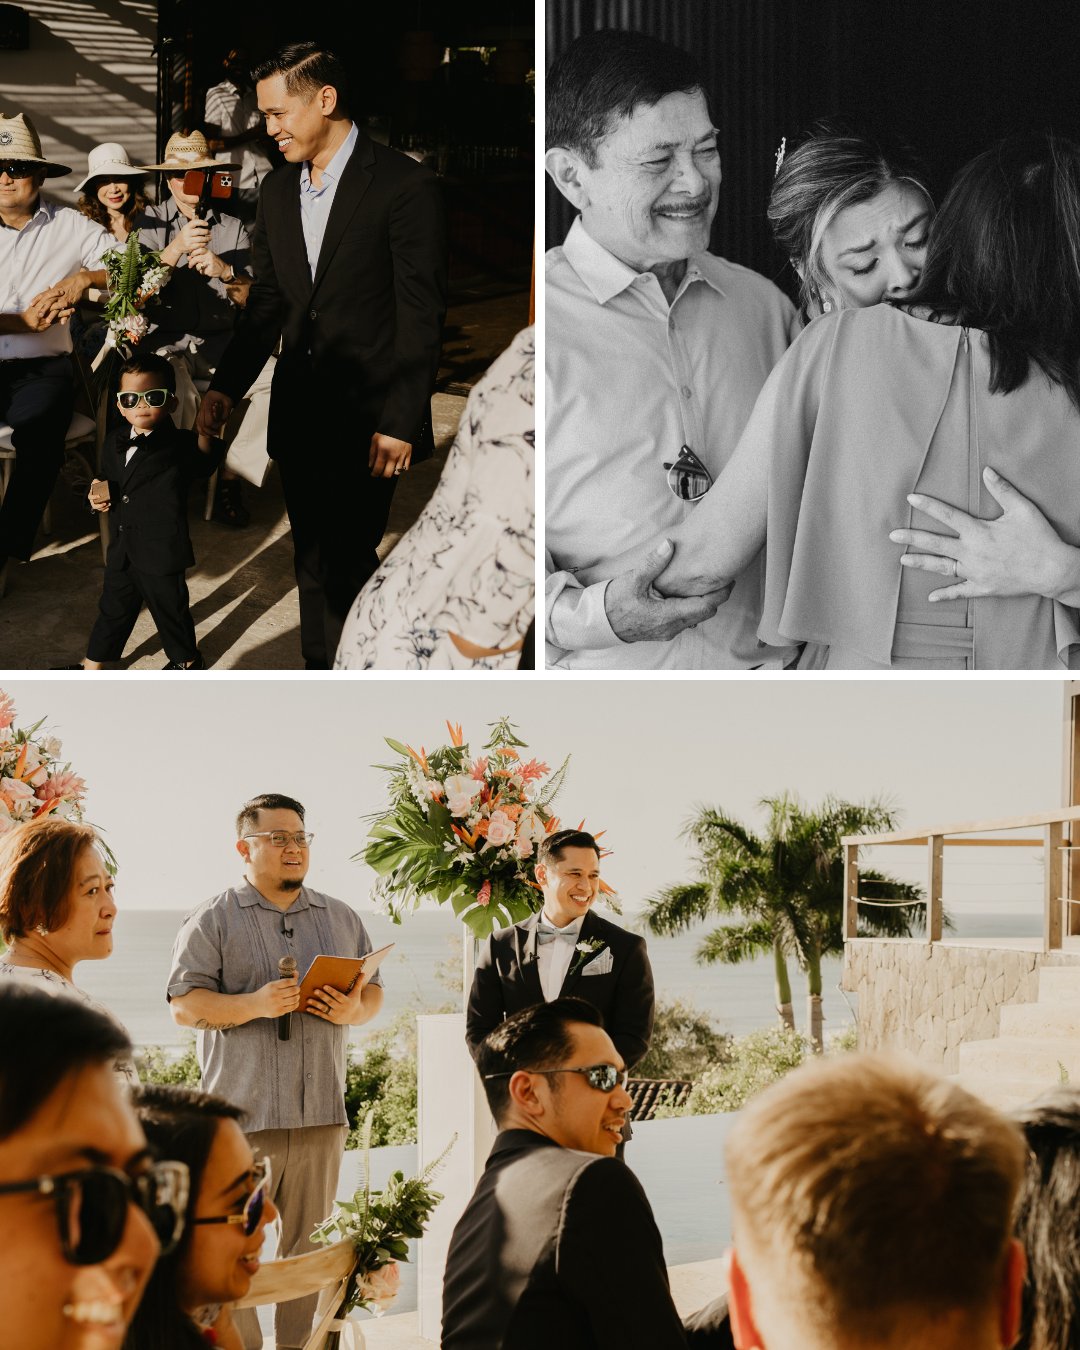 A collage of wedding moments: A boy in a suit and sunglasses walks down the aisle with a couple, an emotional hug between the bride and two older individuals, the groom waiting at the altar, and guests smiling during the ceremony with an ocean view backdrop.